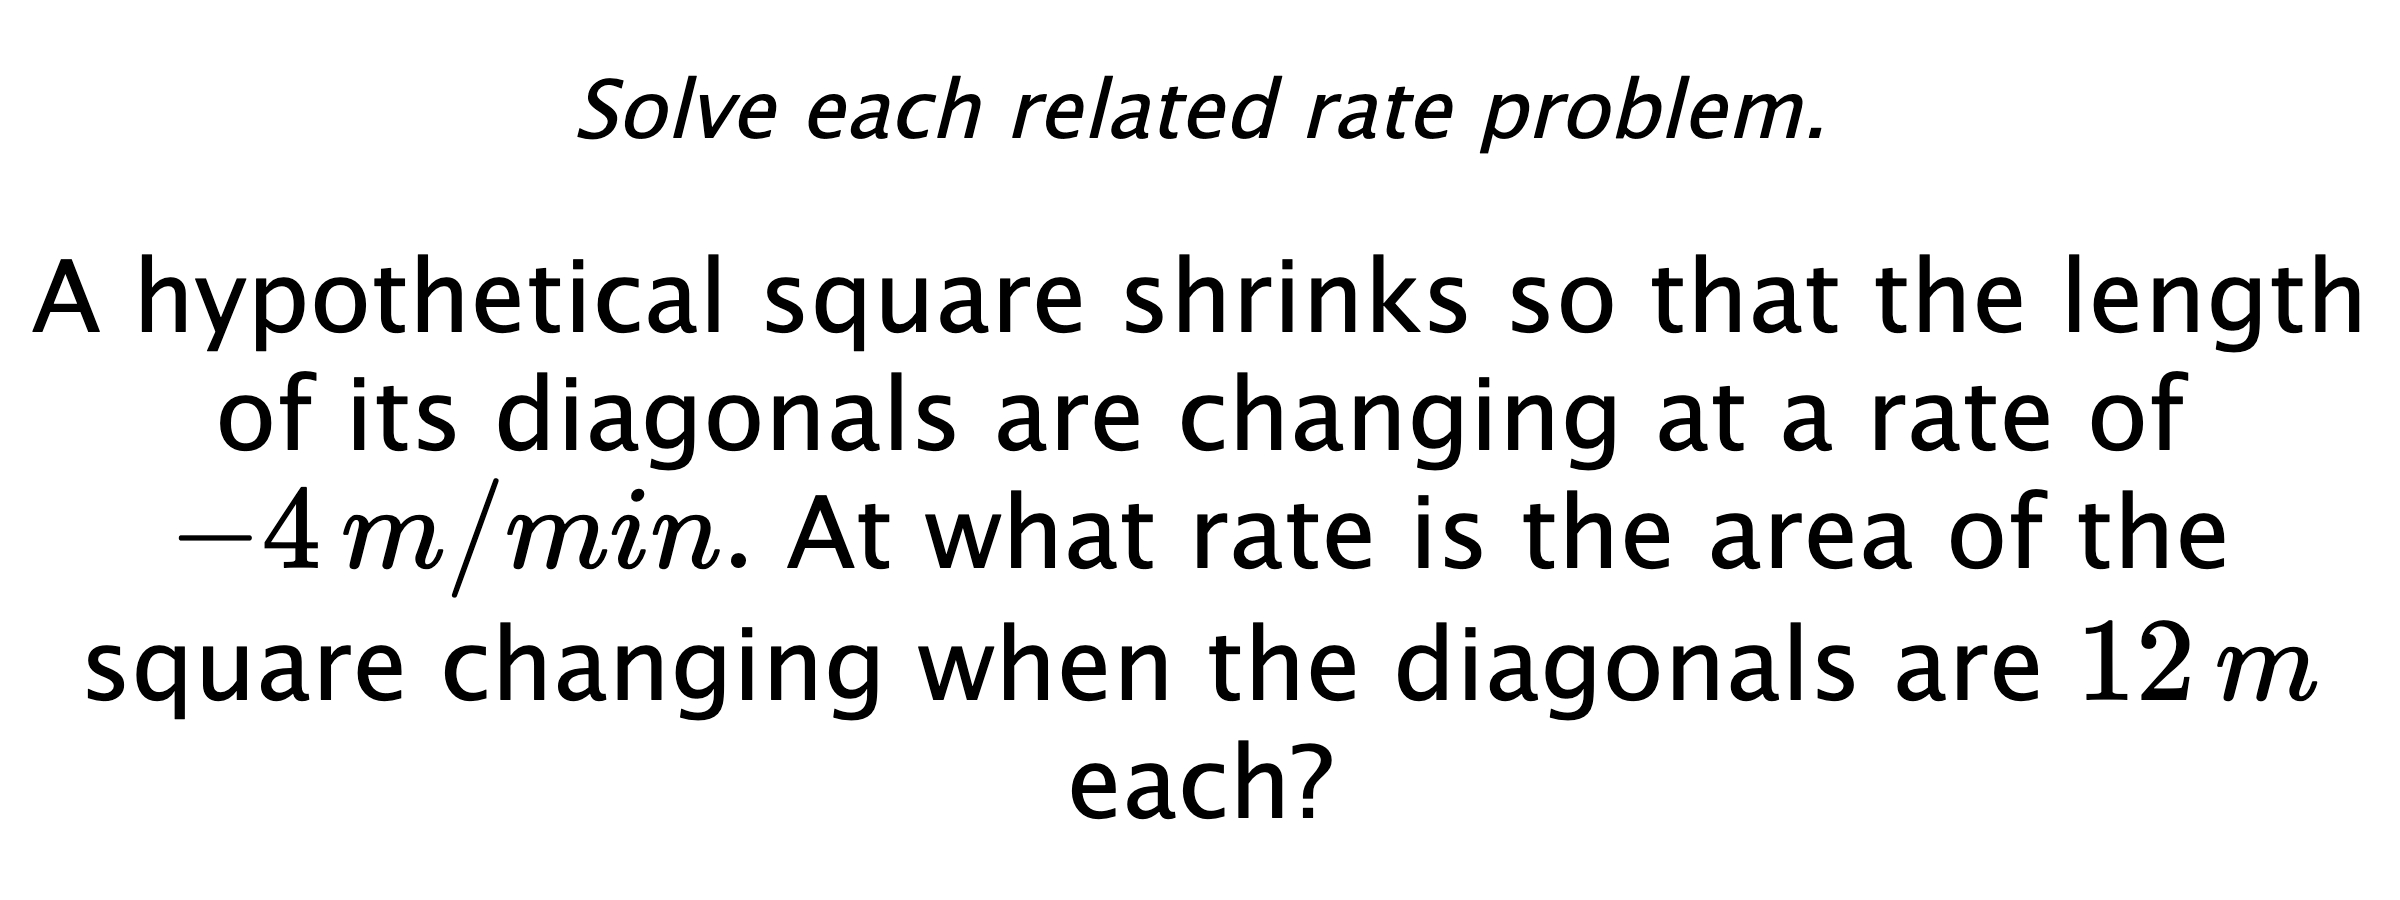 Solve each related rate problem. A hypothetical square shrinks so that the length of its diagonals are changing at a rate of $-4\,m/min.$ At what rate is the area of the square changing when the diagonals are $12\,m$ each?